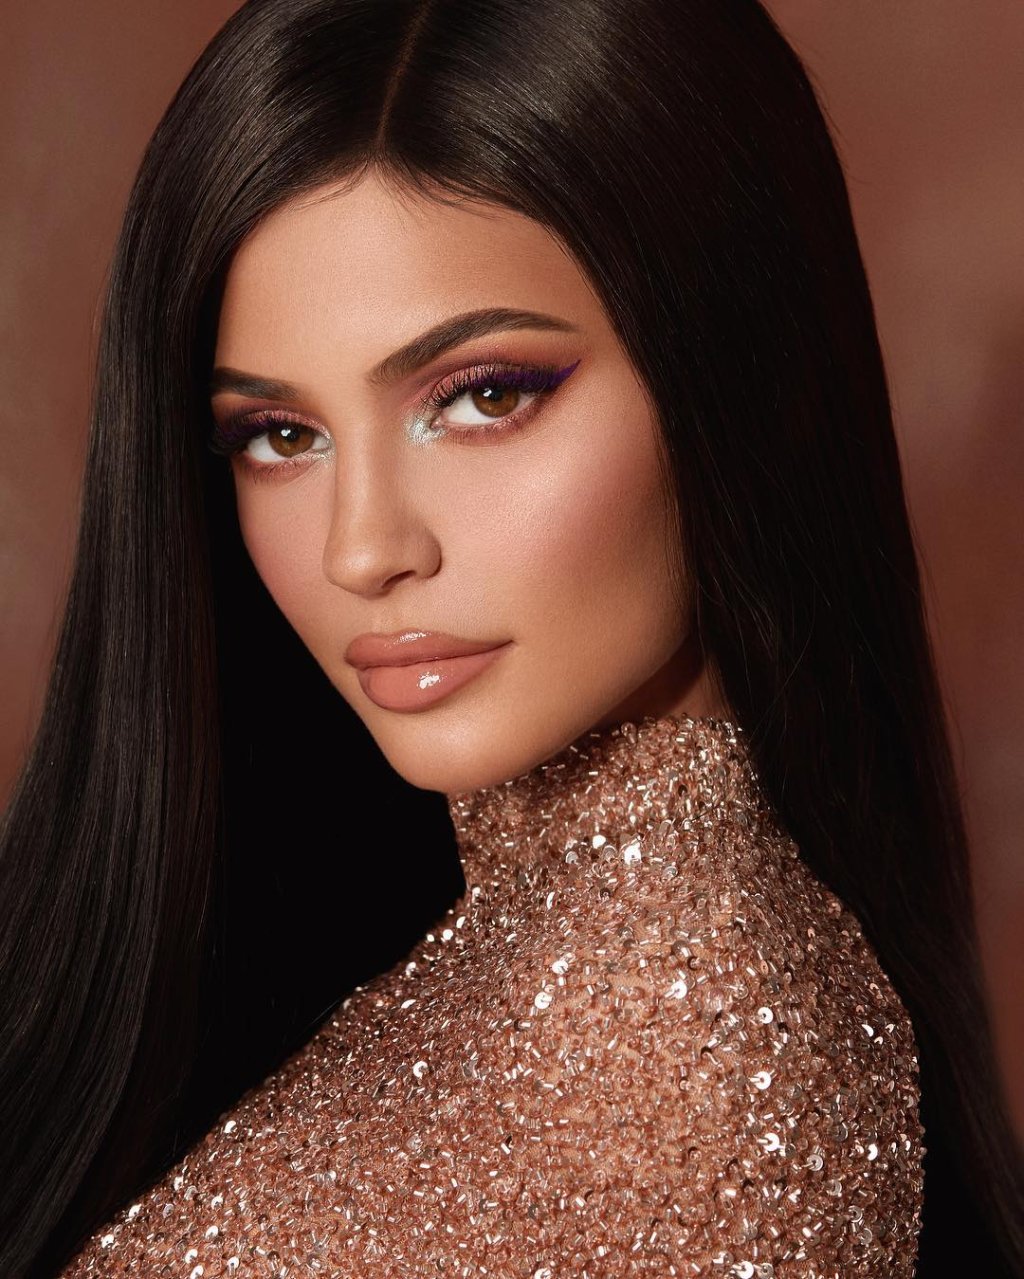 kylie-jenner-canto-interno